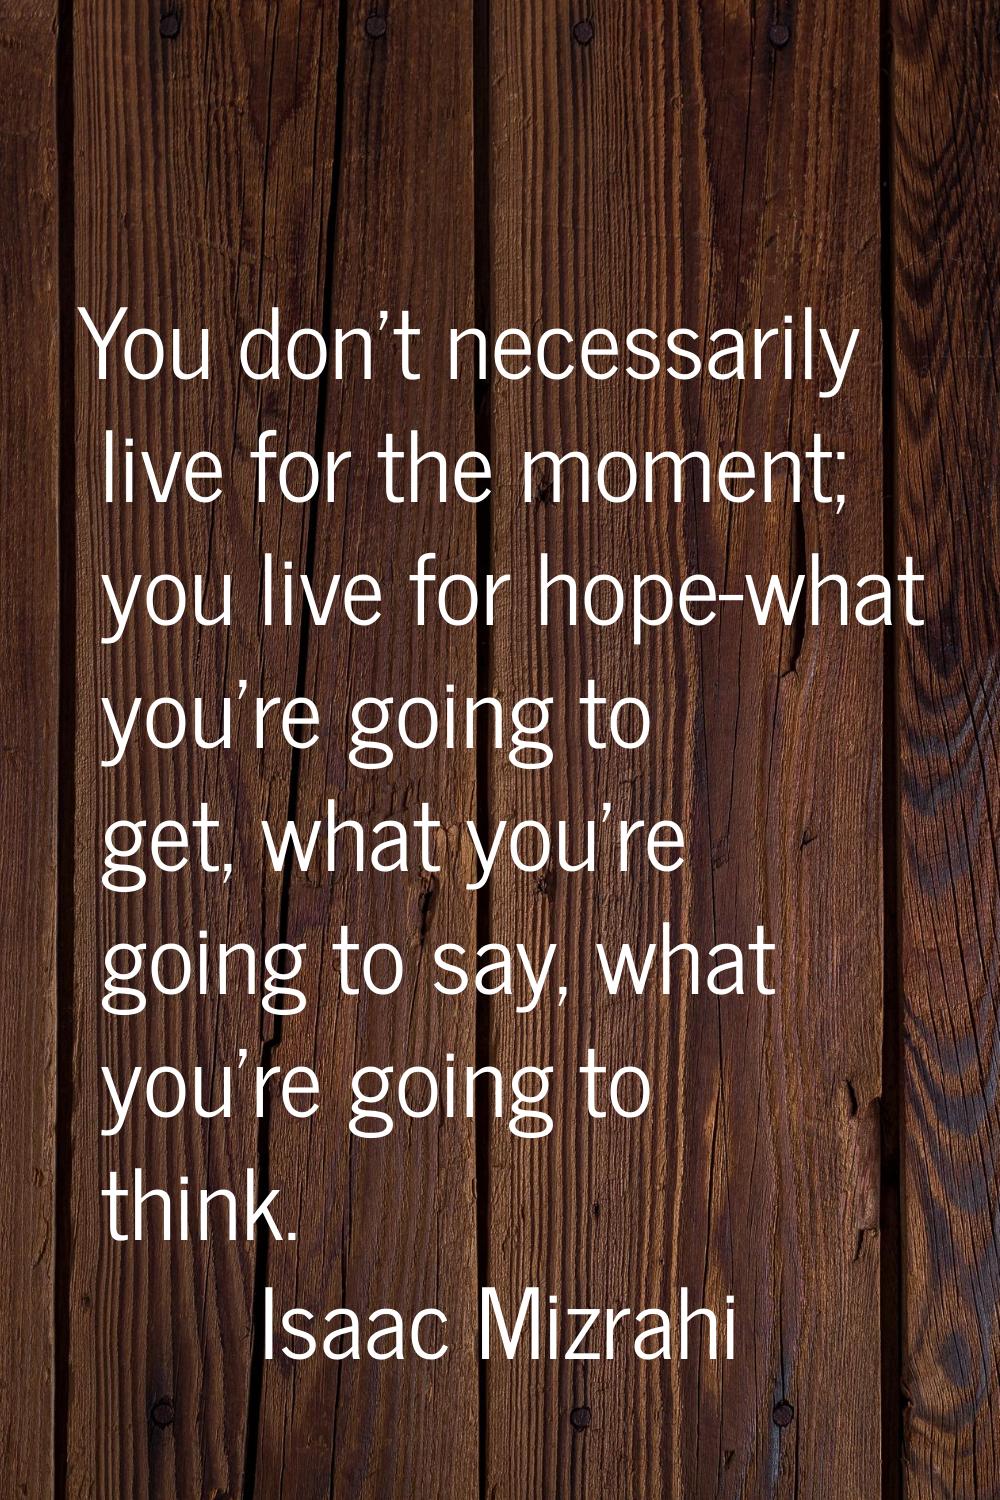 You don't necessarily live for the moment; you live for hope-what you're going to get, what you're 